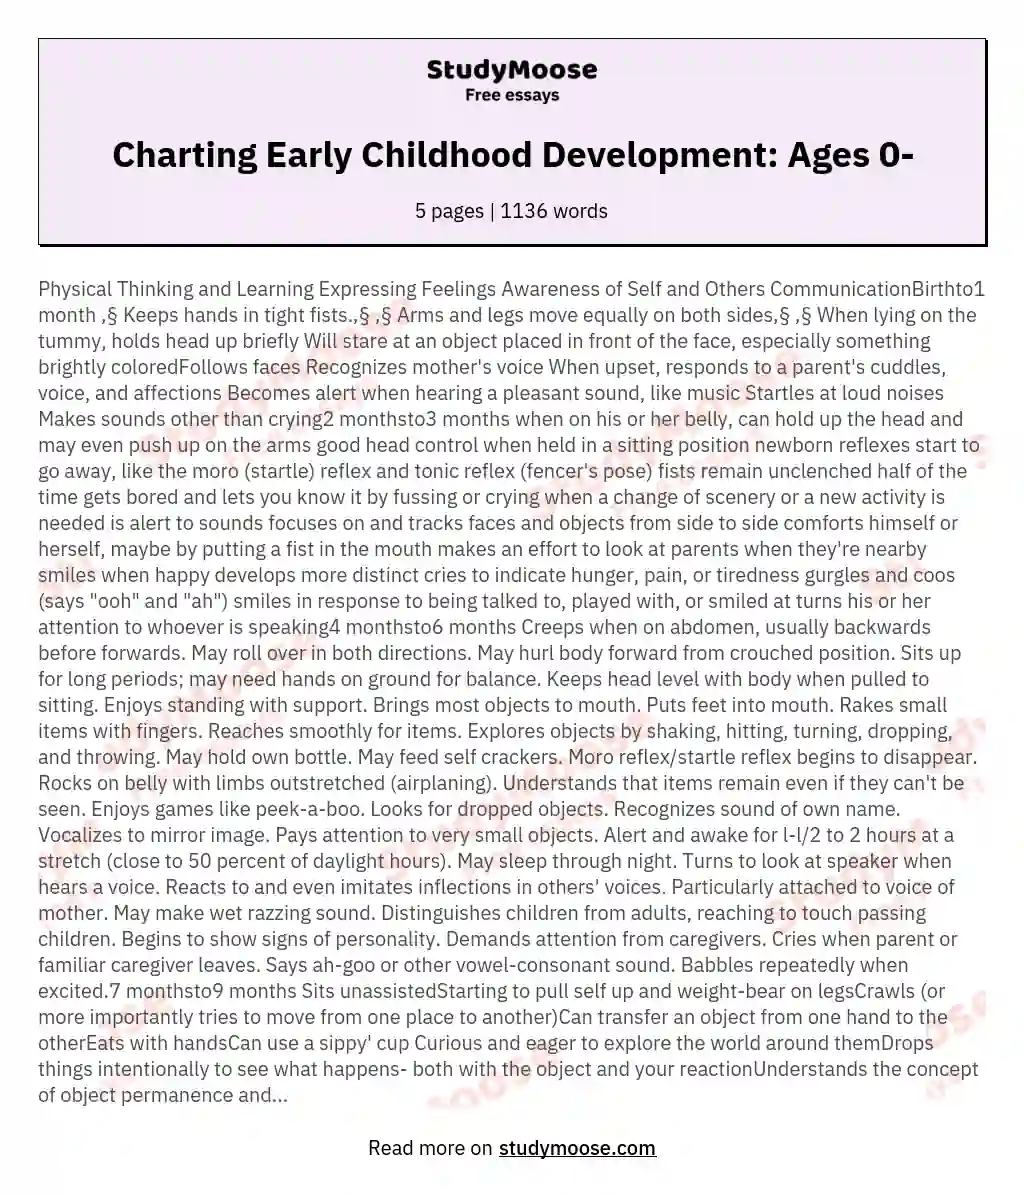 Charting Early Childhood Development: Ages 0- essay